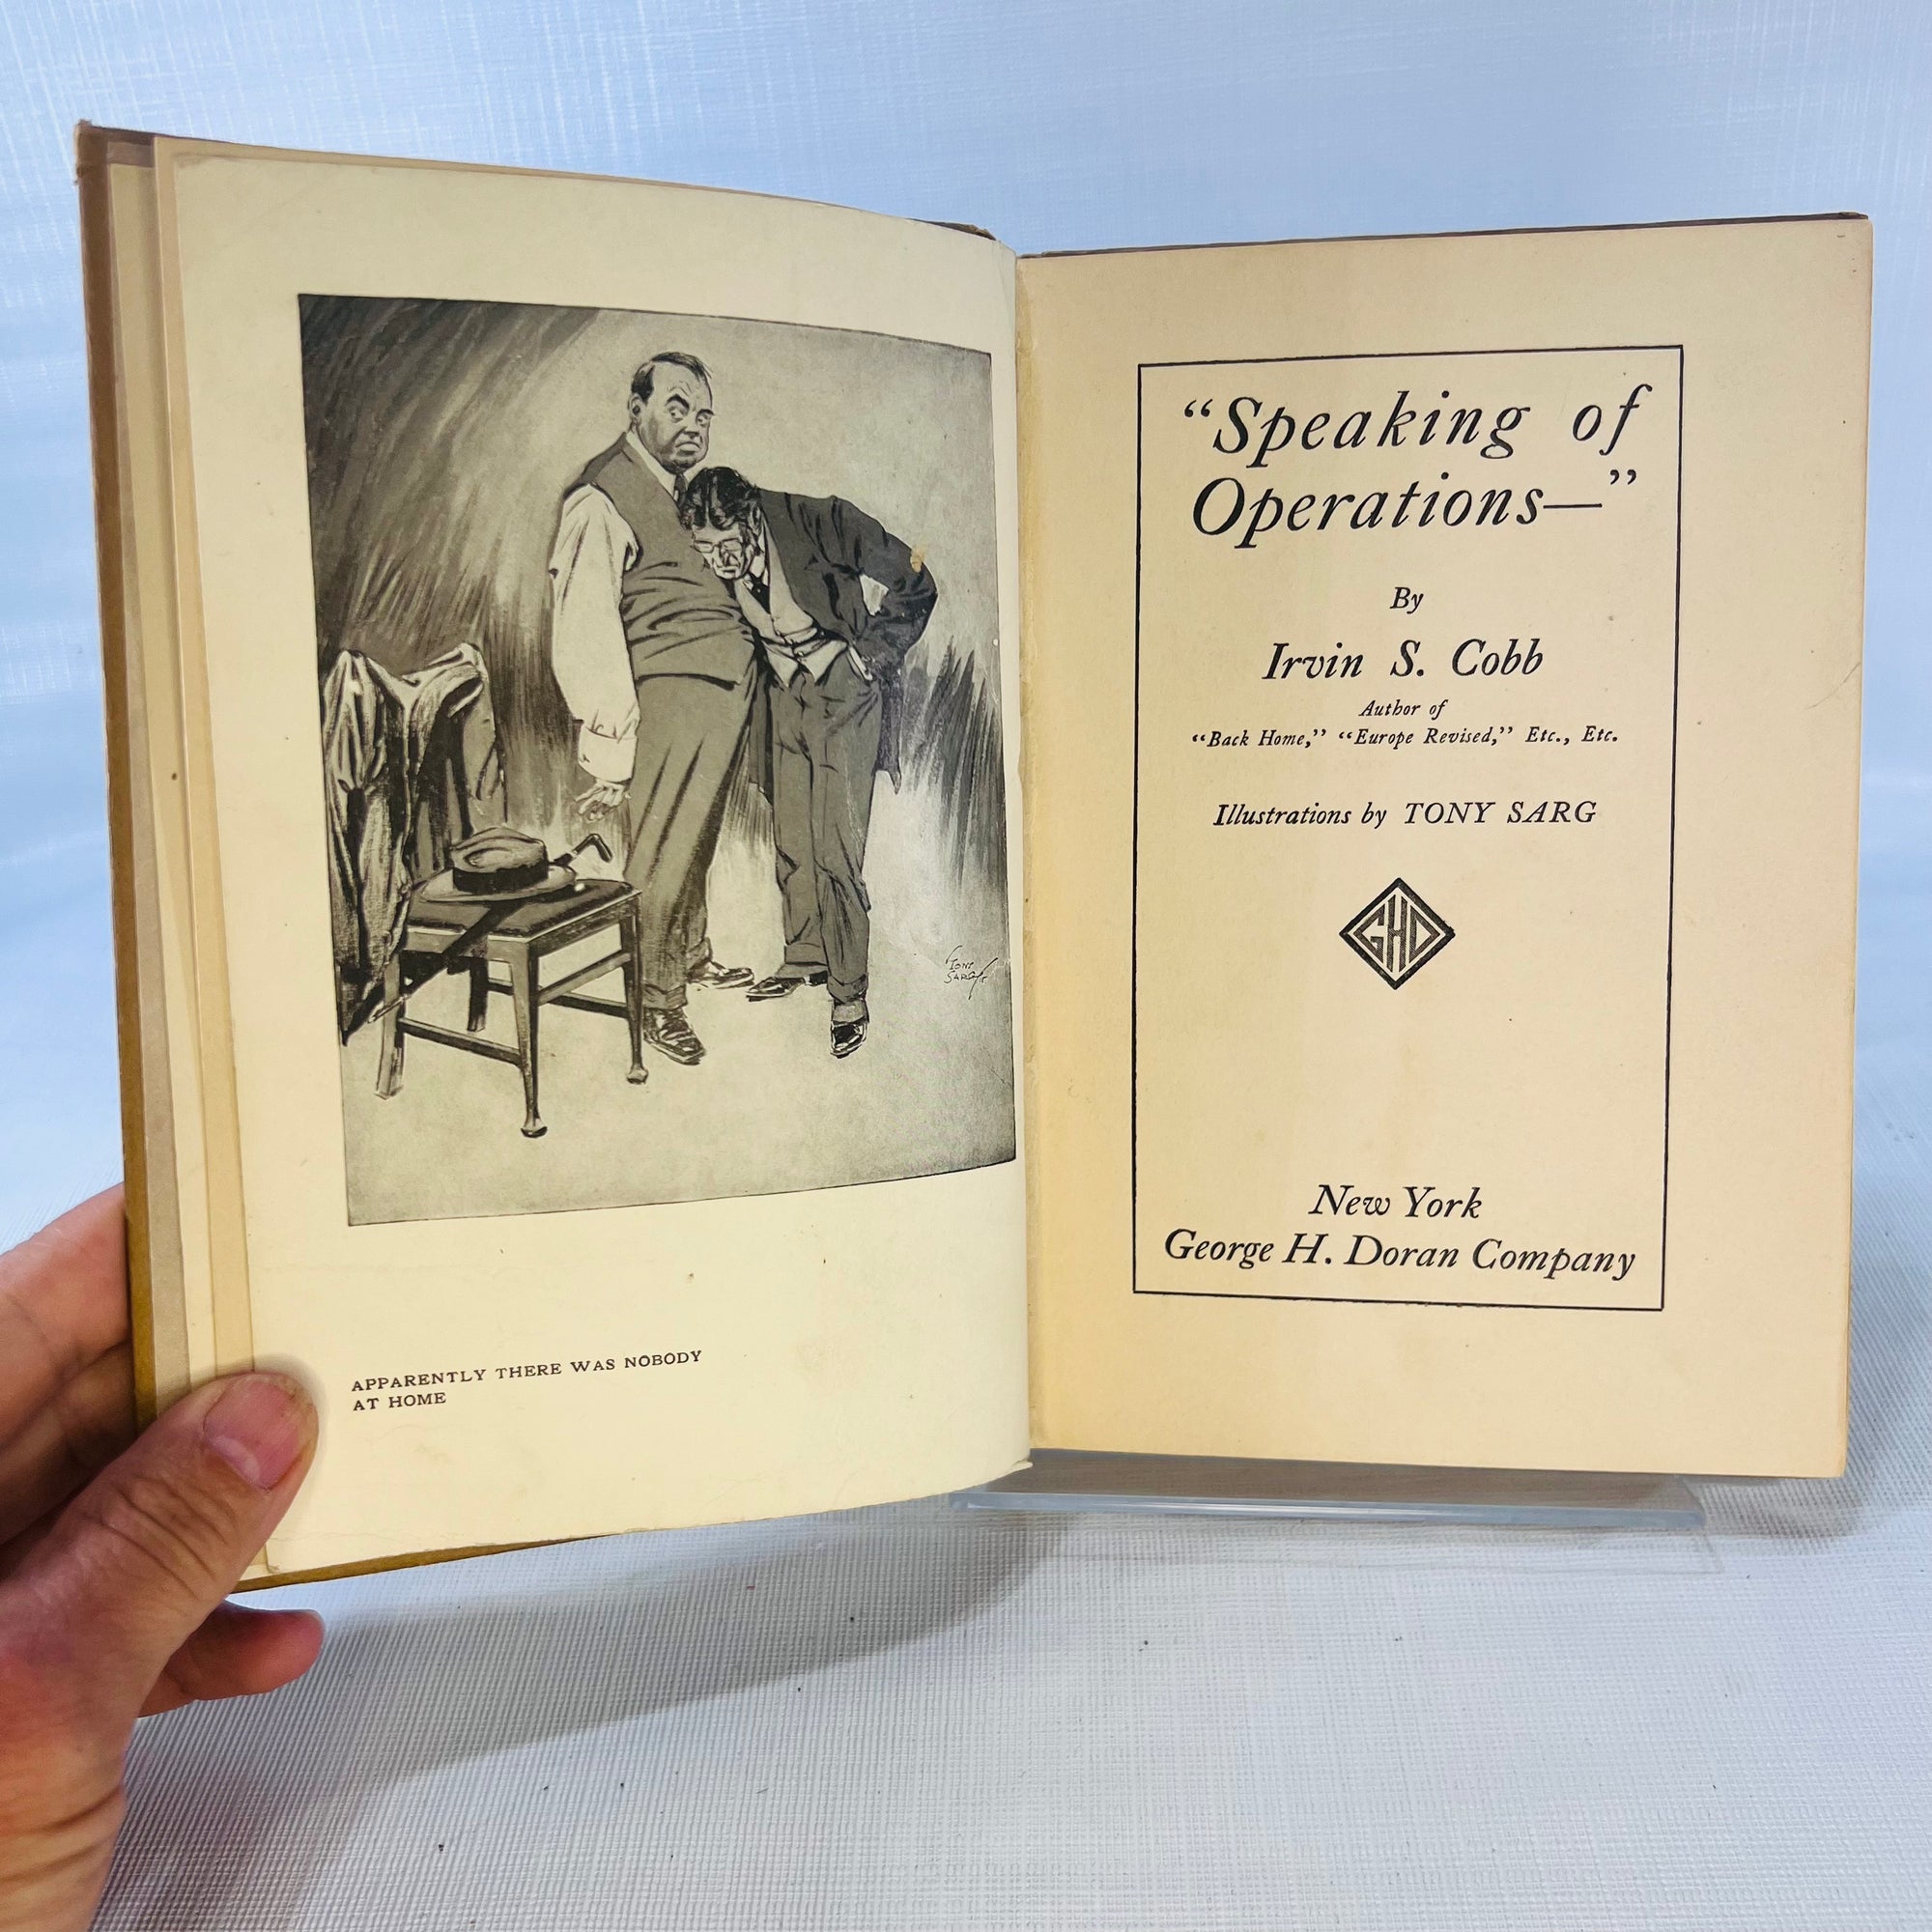 Speaking of Operations Irvin S. Cobb illustrations by Tony Sarg 1915 George H. Doran Company